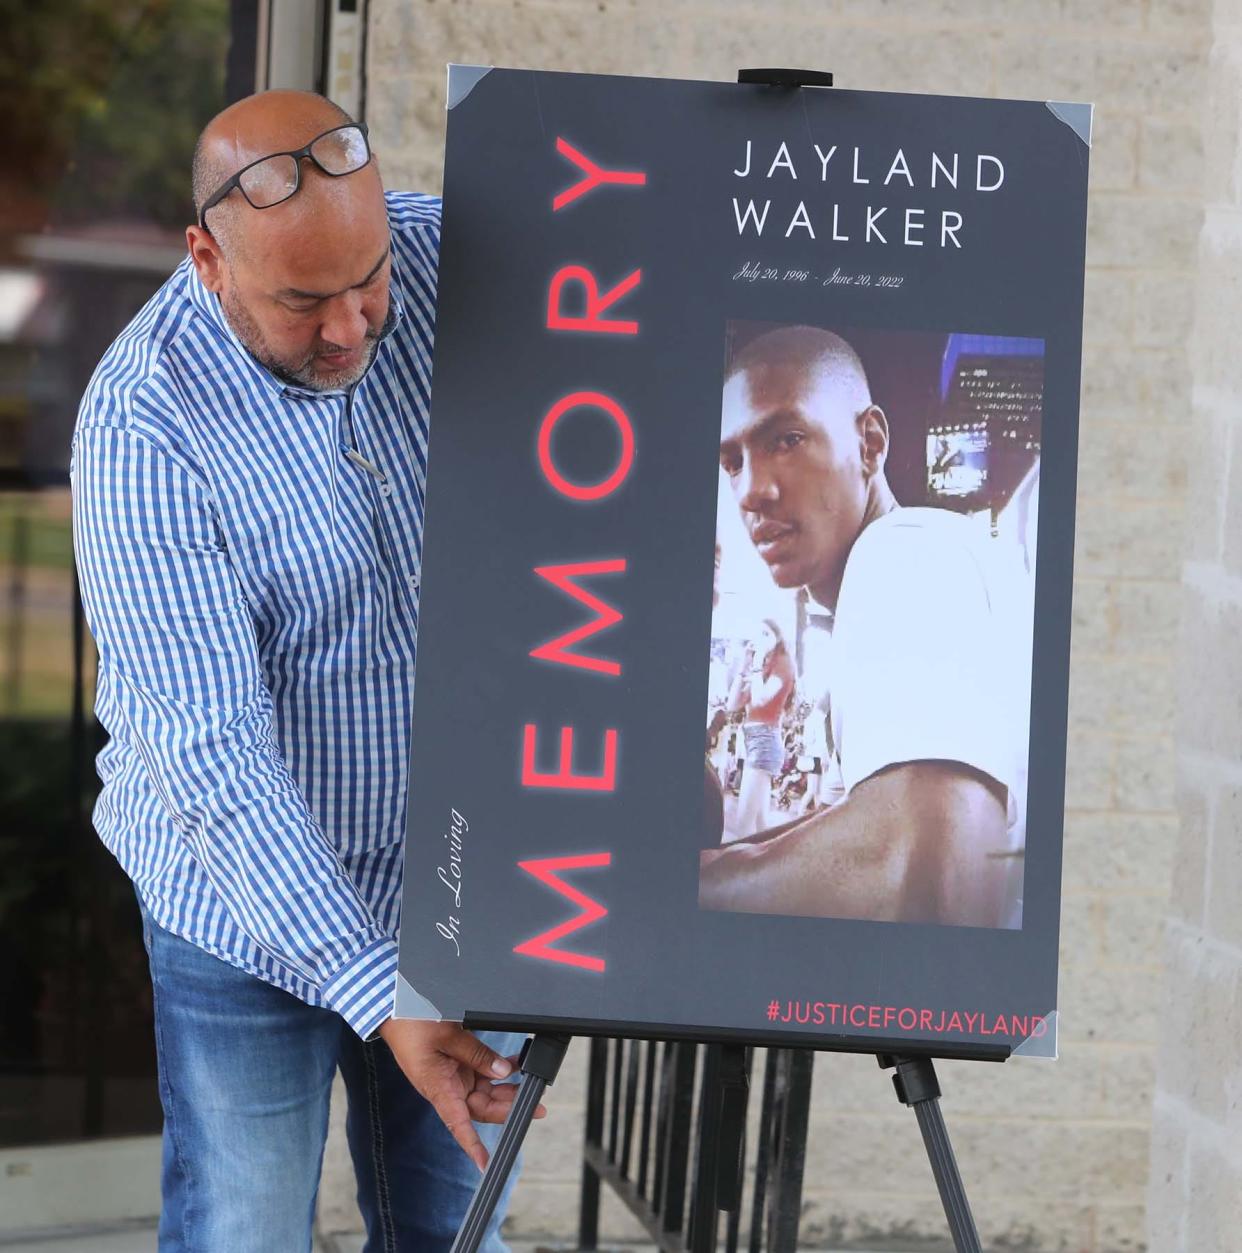 A member of the legal team representing the family of Jayland Walker places a photo of Walker outside the door at St. Ashworth Temple Church of God in Christ before a press conference on Monday in Akron.